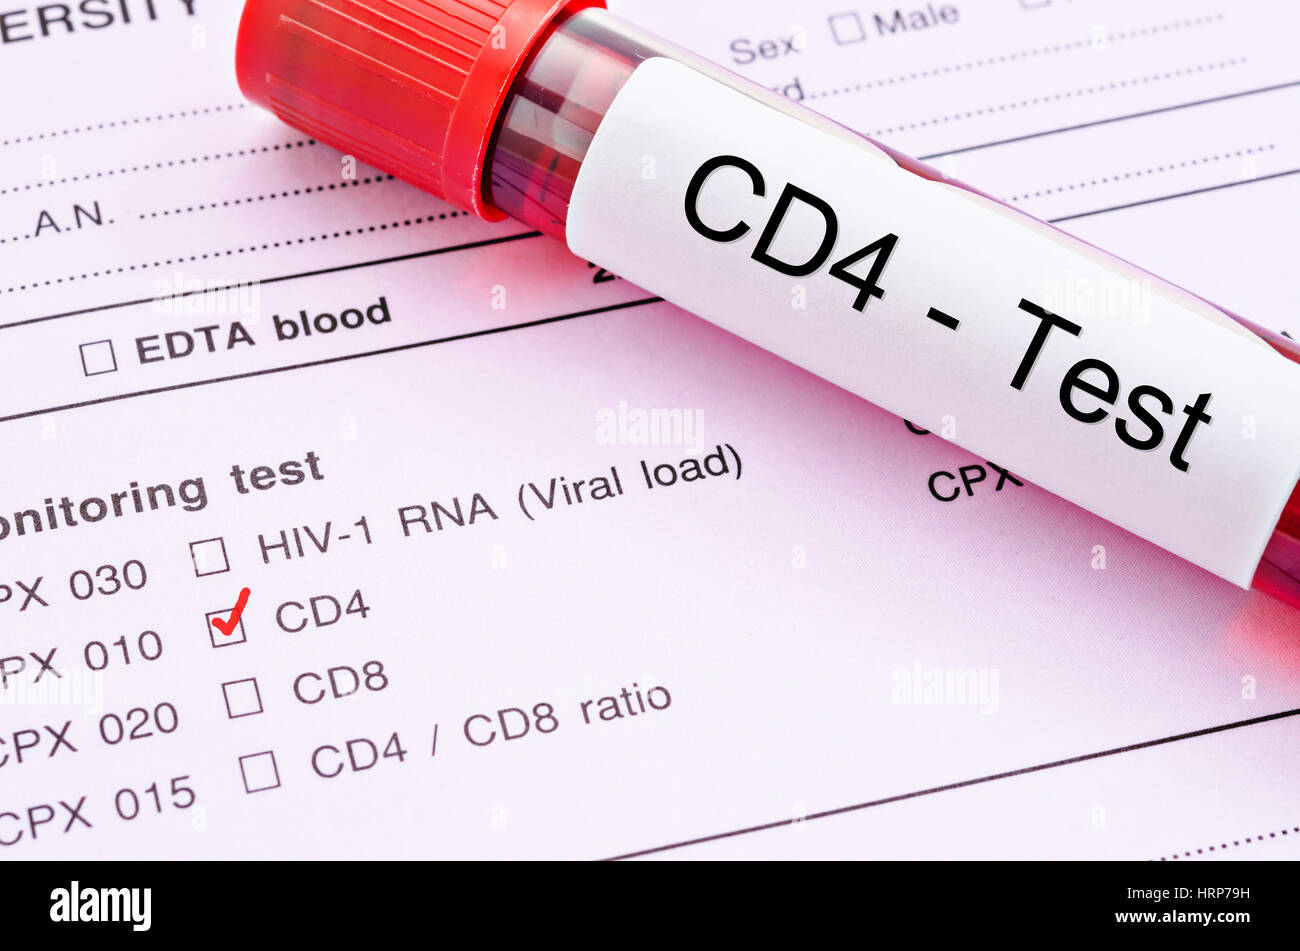 Red Mark And Blood Sample In Tube For Cd4 Cell Testing Immunology Cell In Hiv Infected People On Request Form Background Stock Photo Alamy